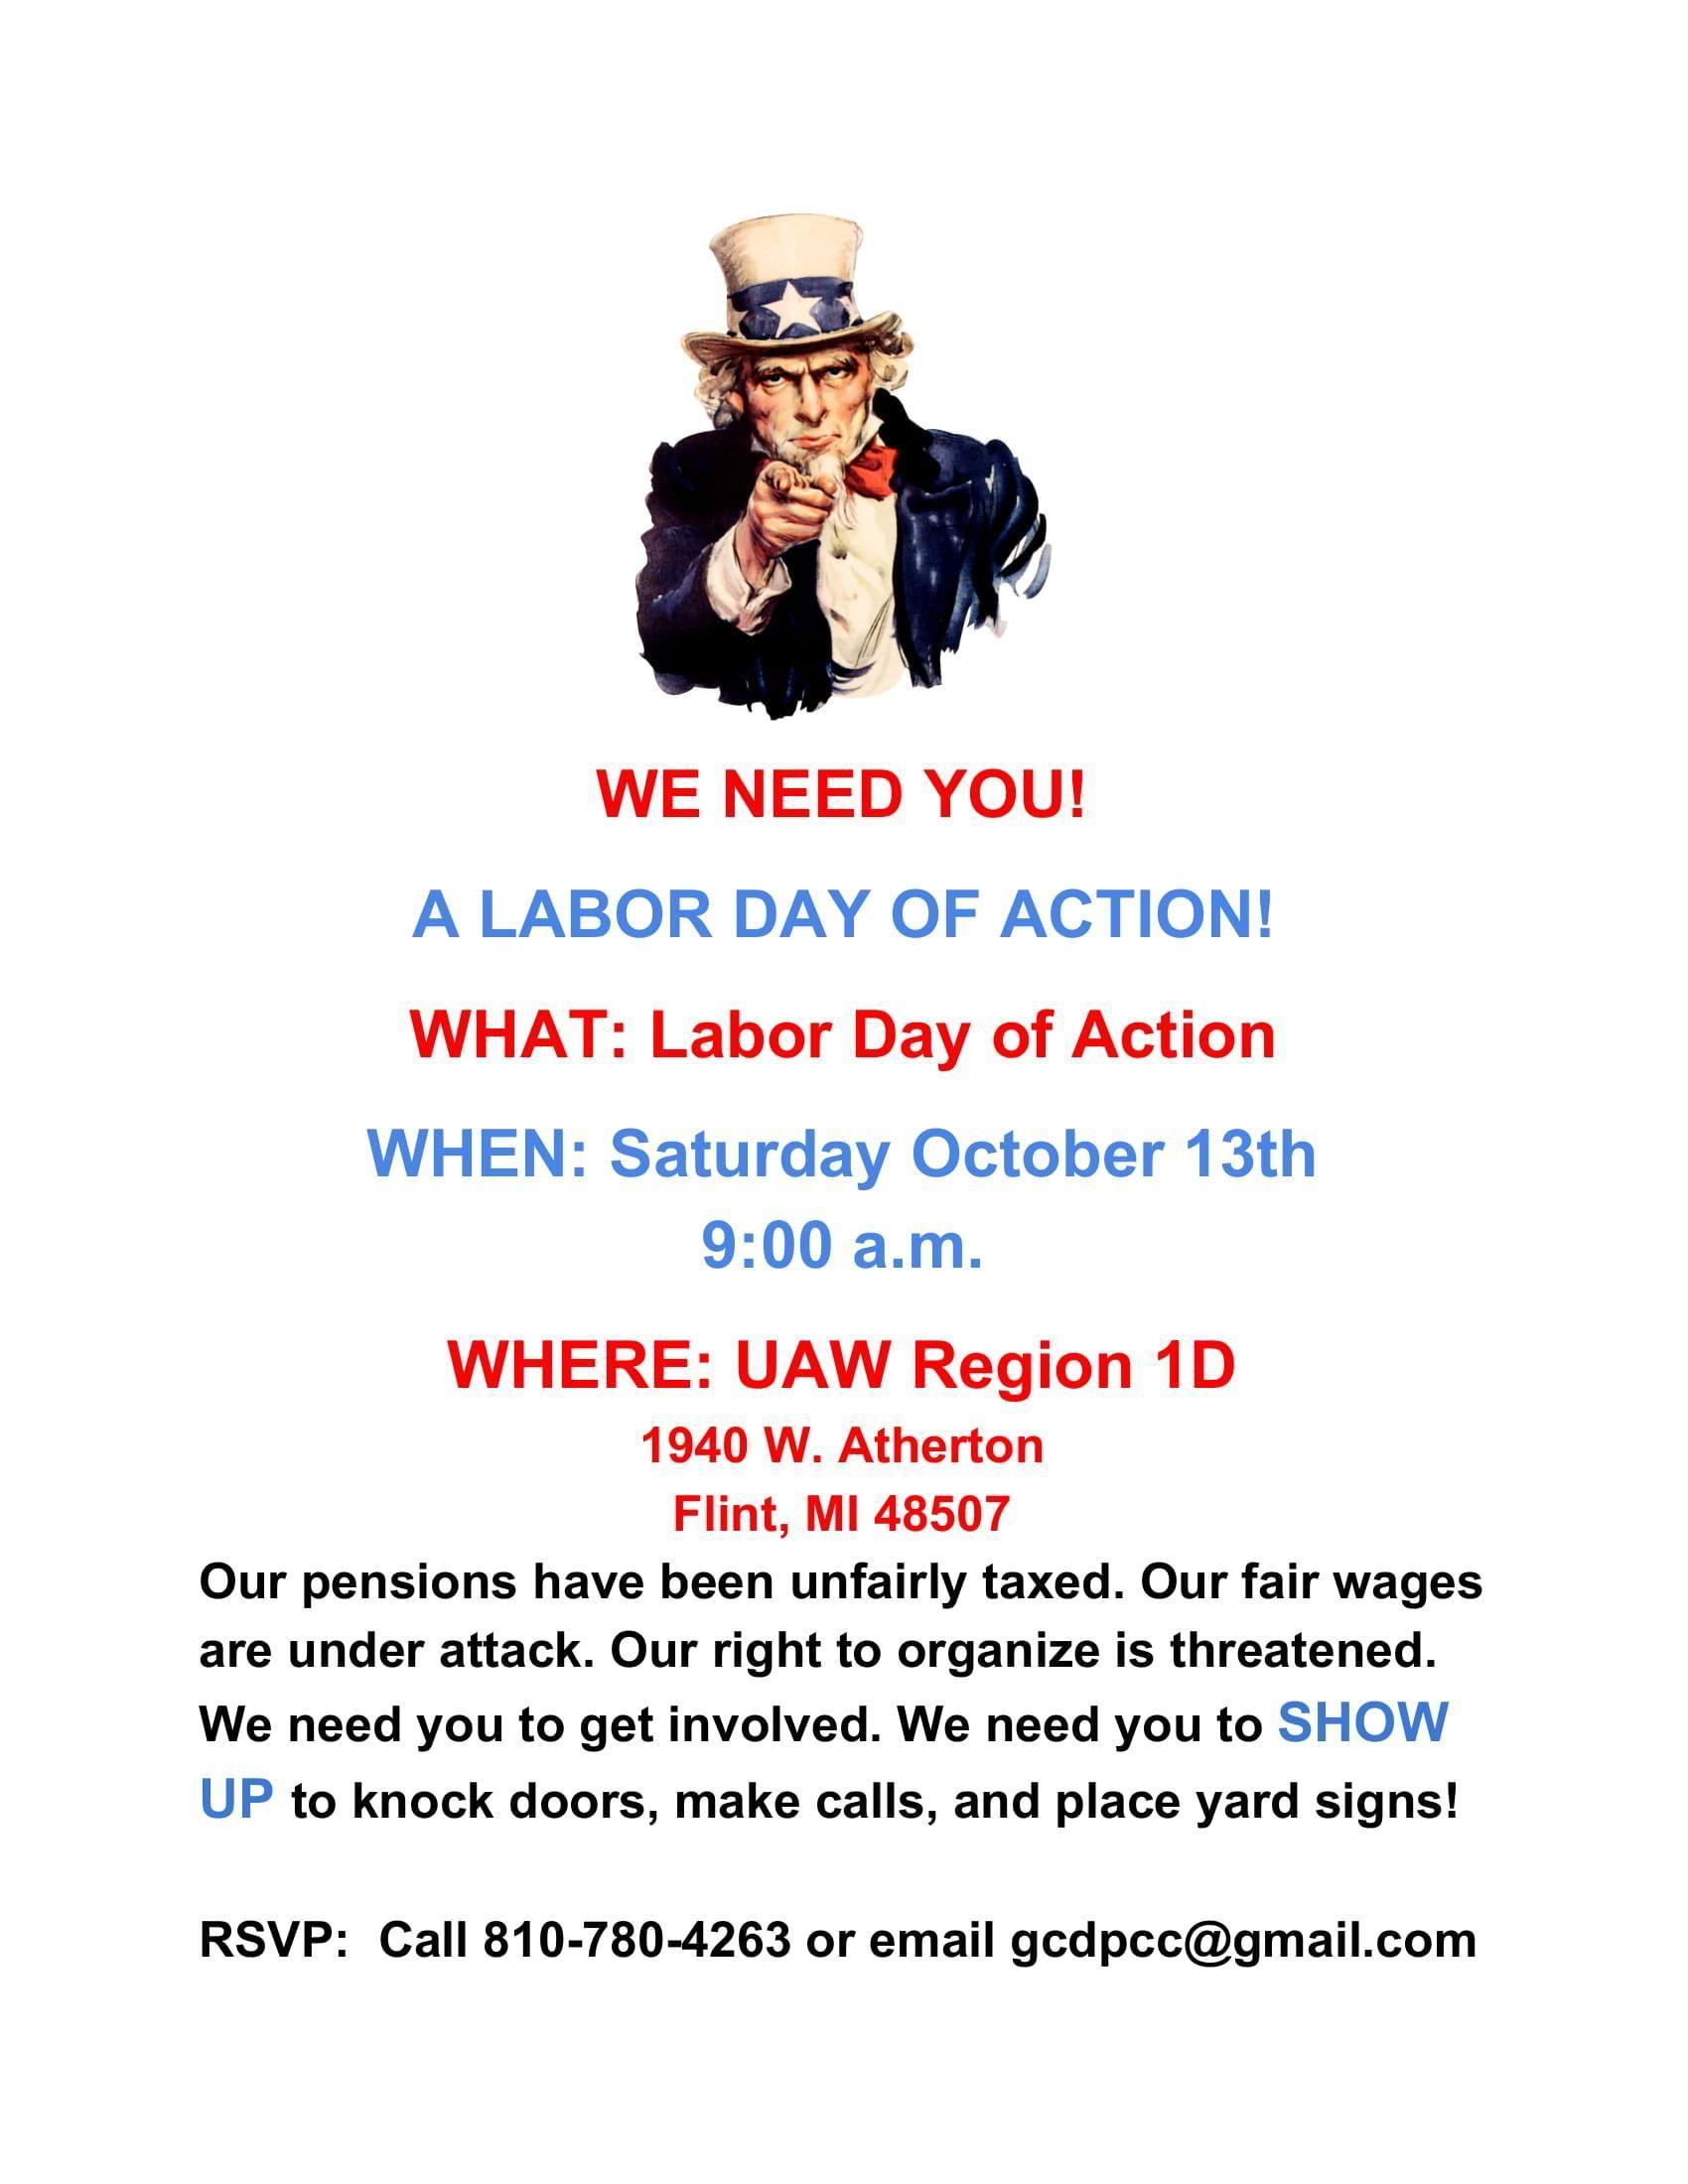 UAW Region 1D Logo - Flint Day of Action | Council 25